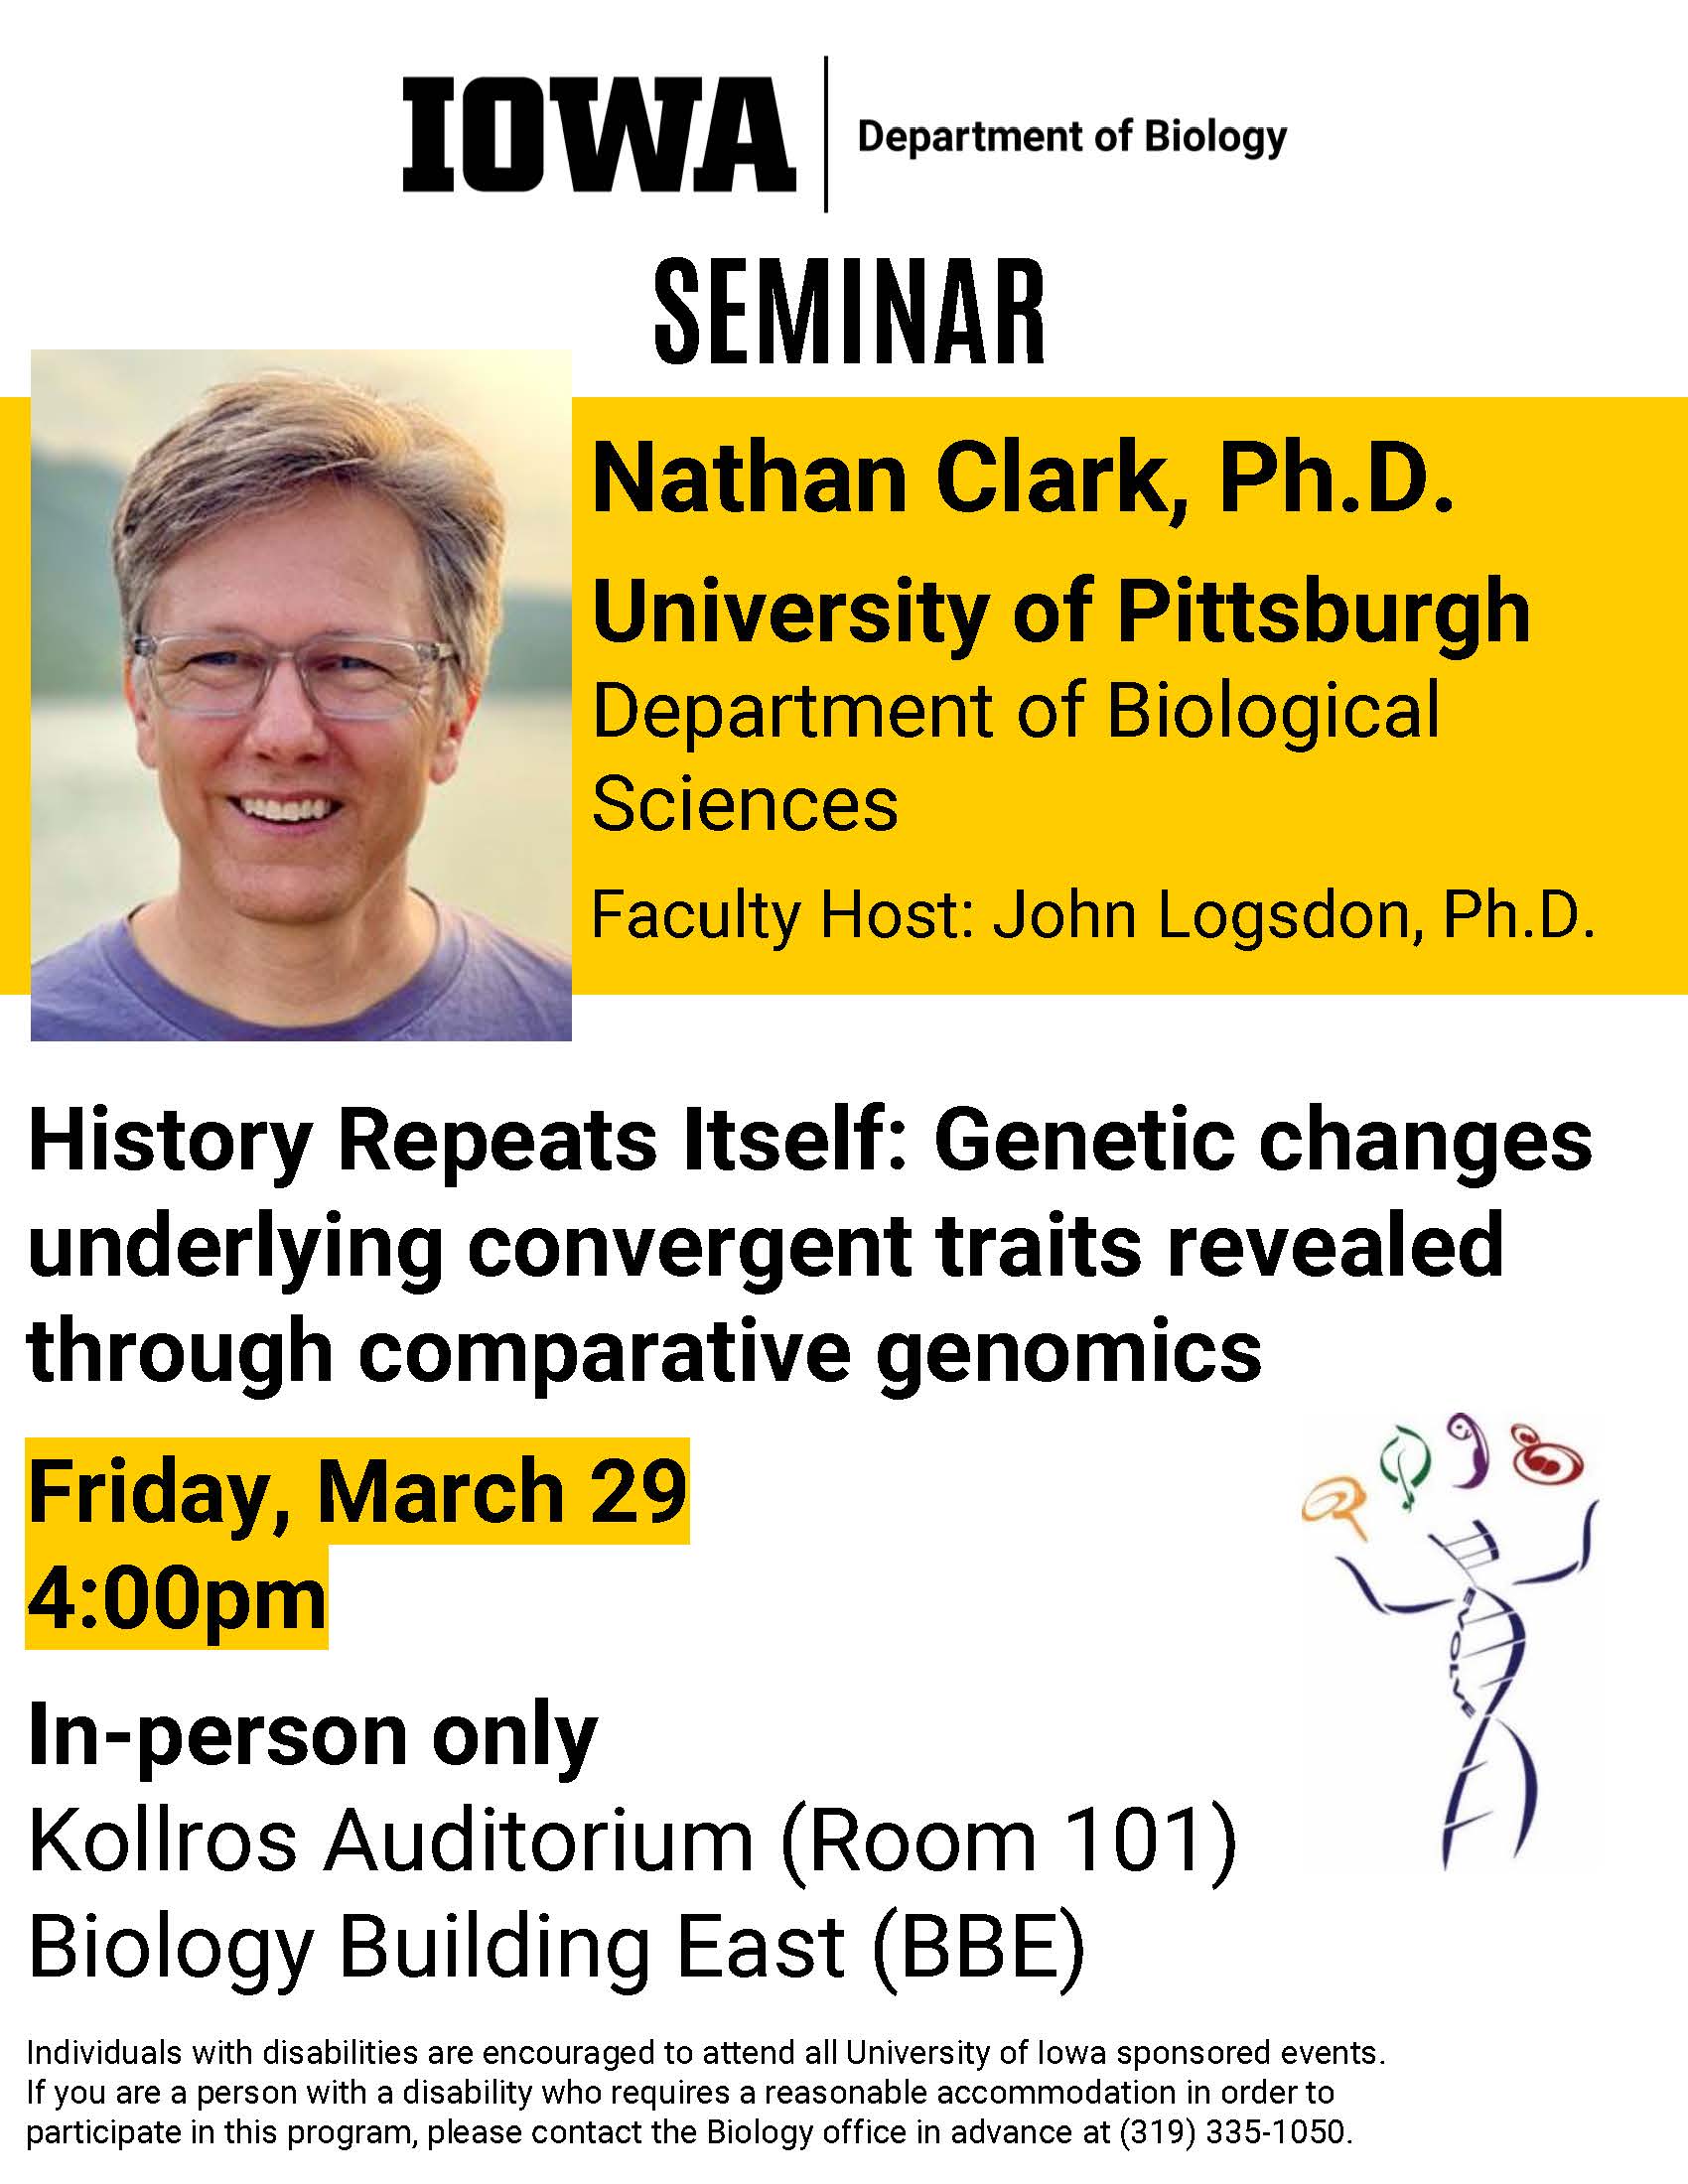 Biology Seminar: "History Repeats Itself: Genetic changes underlying convergent traits revealed through comparative genomics" promotional image